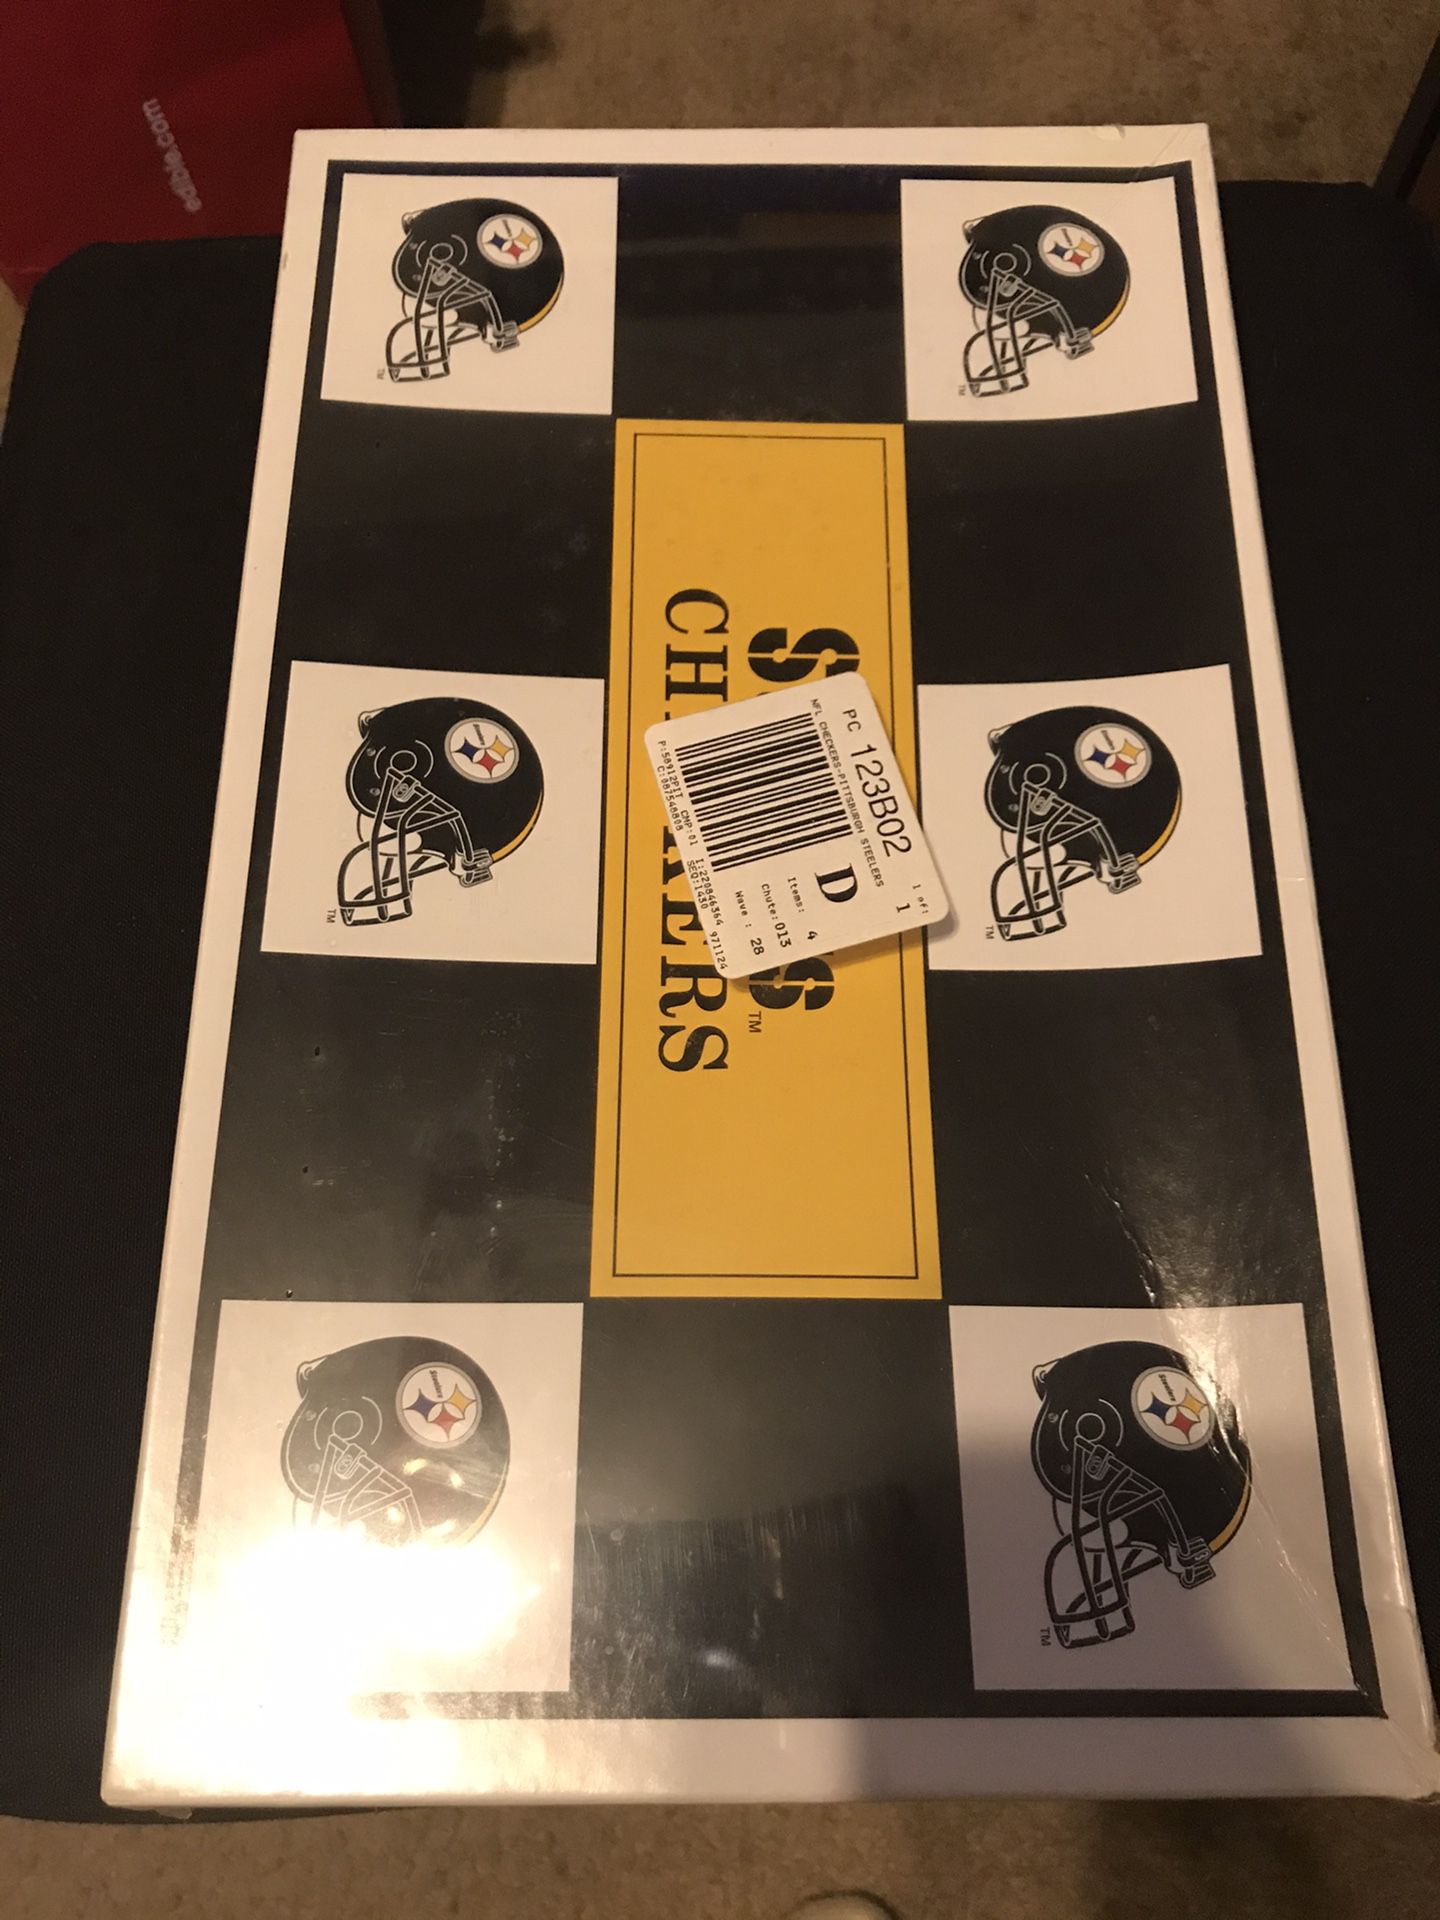 Pittsburgh Steelers checkers from 1993!